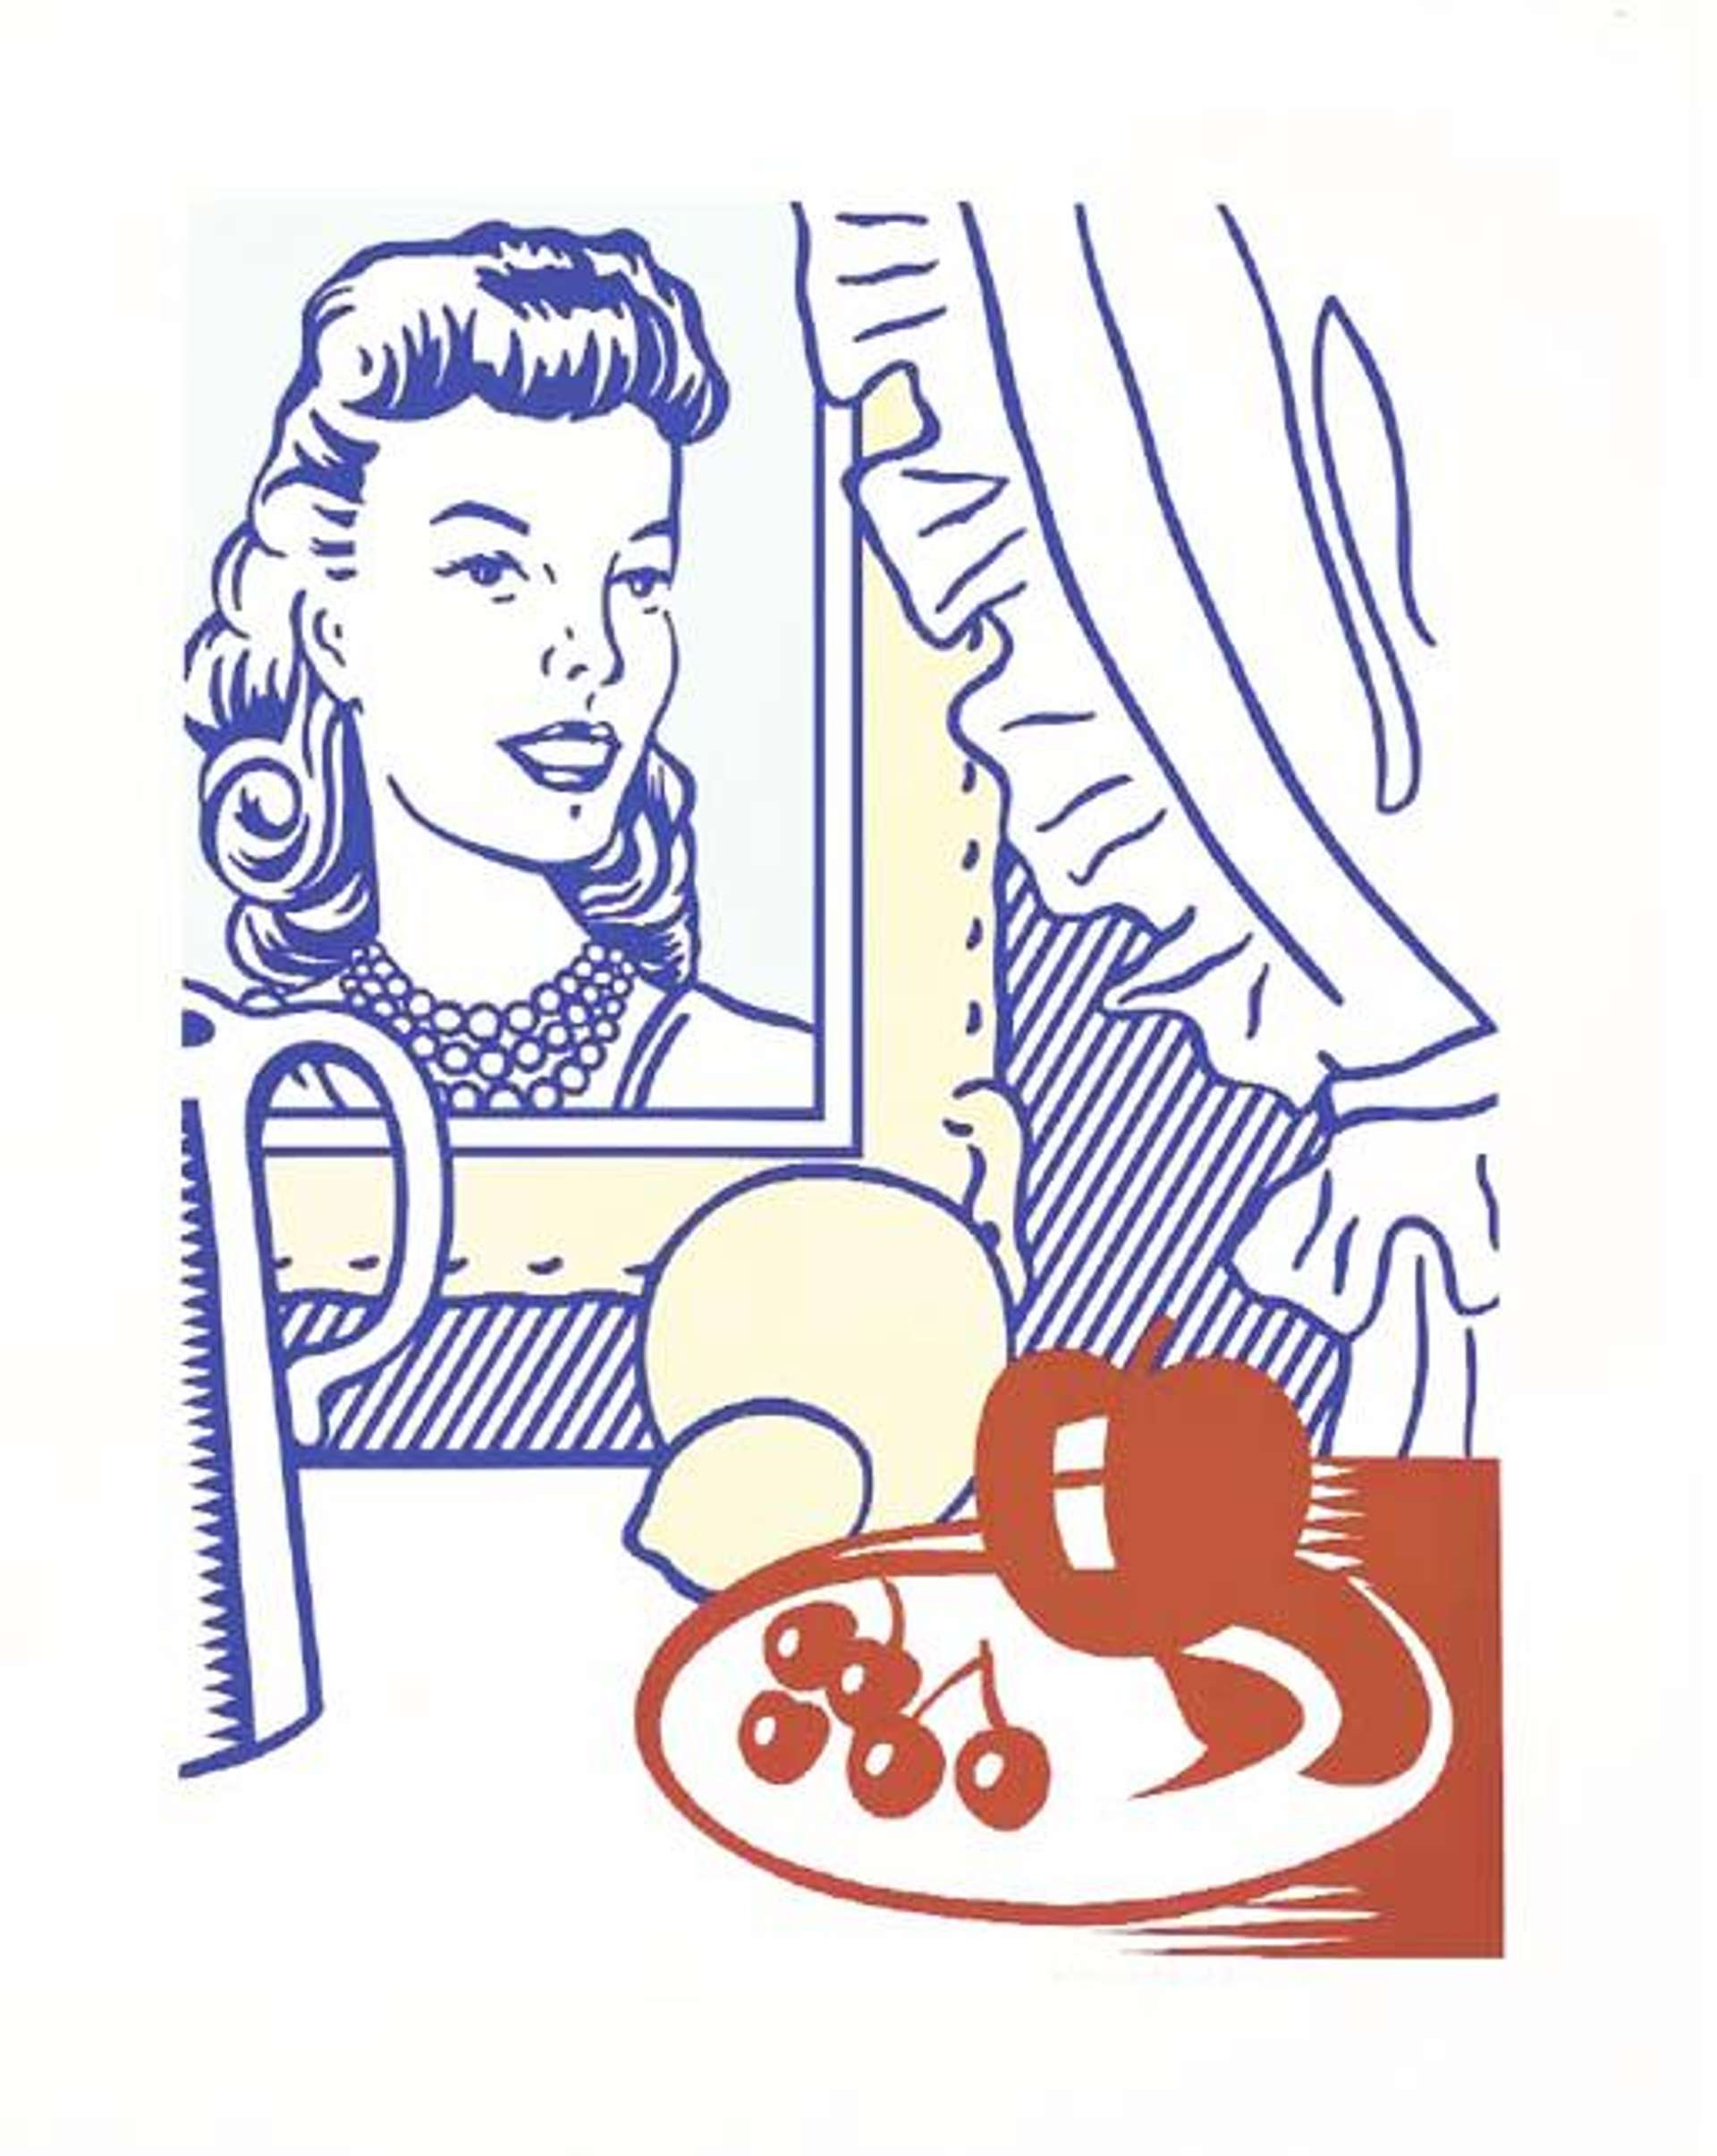 Still Life With Portrait follows the conventional layout of classical still lifes, framing a figurative interior with a frilly curtain and the ear of a pitcher. The portrait of a grinning woman is hung on the wall, reminiscent of a glamour shot. A bowl of fruit, contrastively minimalist, is situated on the table in the foreground of the work.